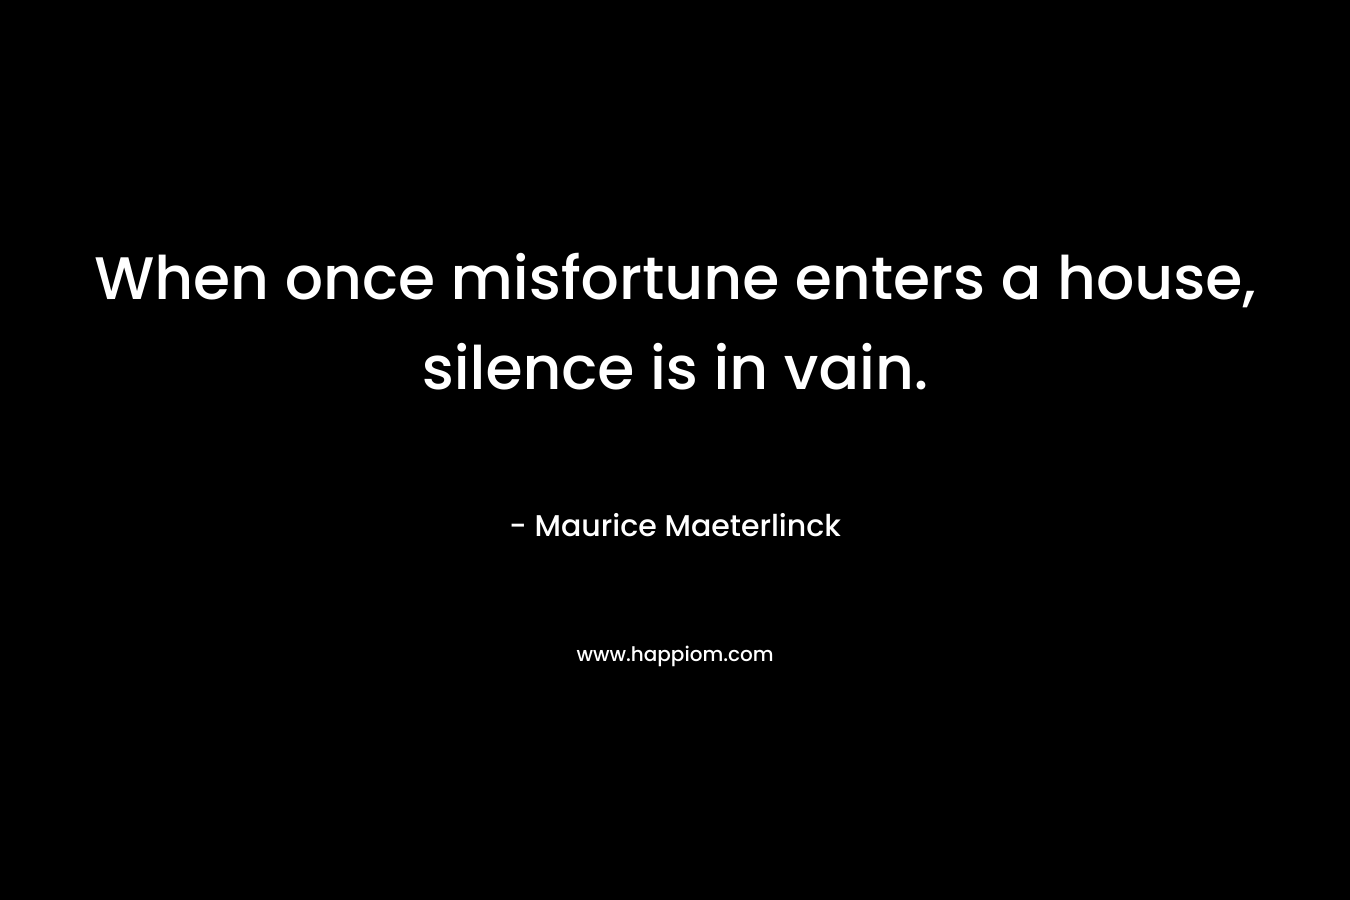 When once misfortune enters a house, silence is in vain.